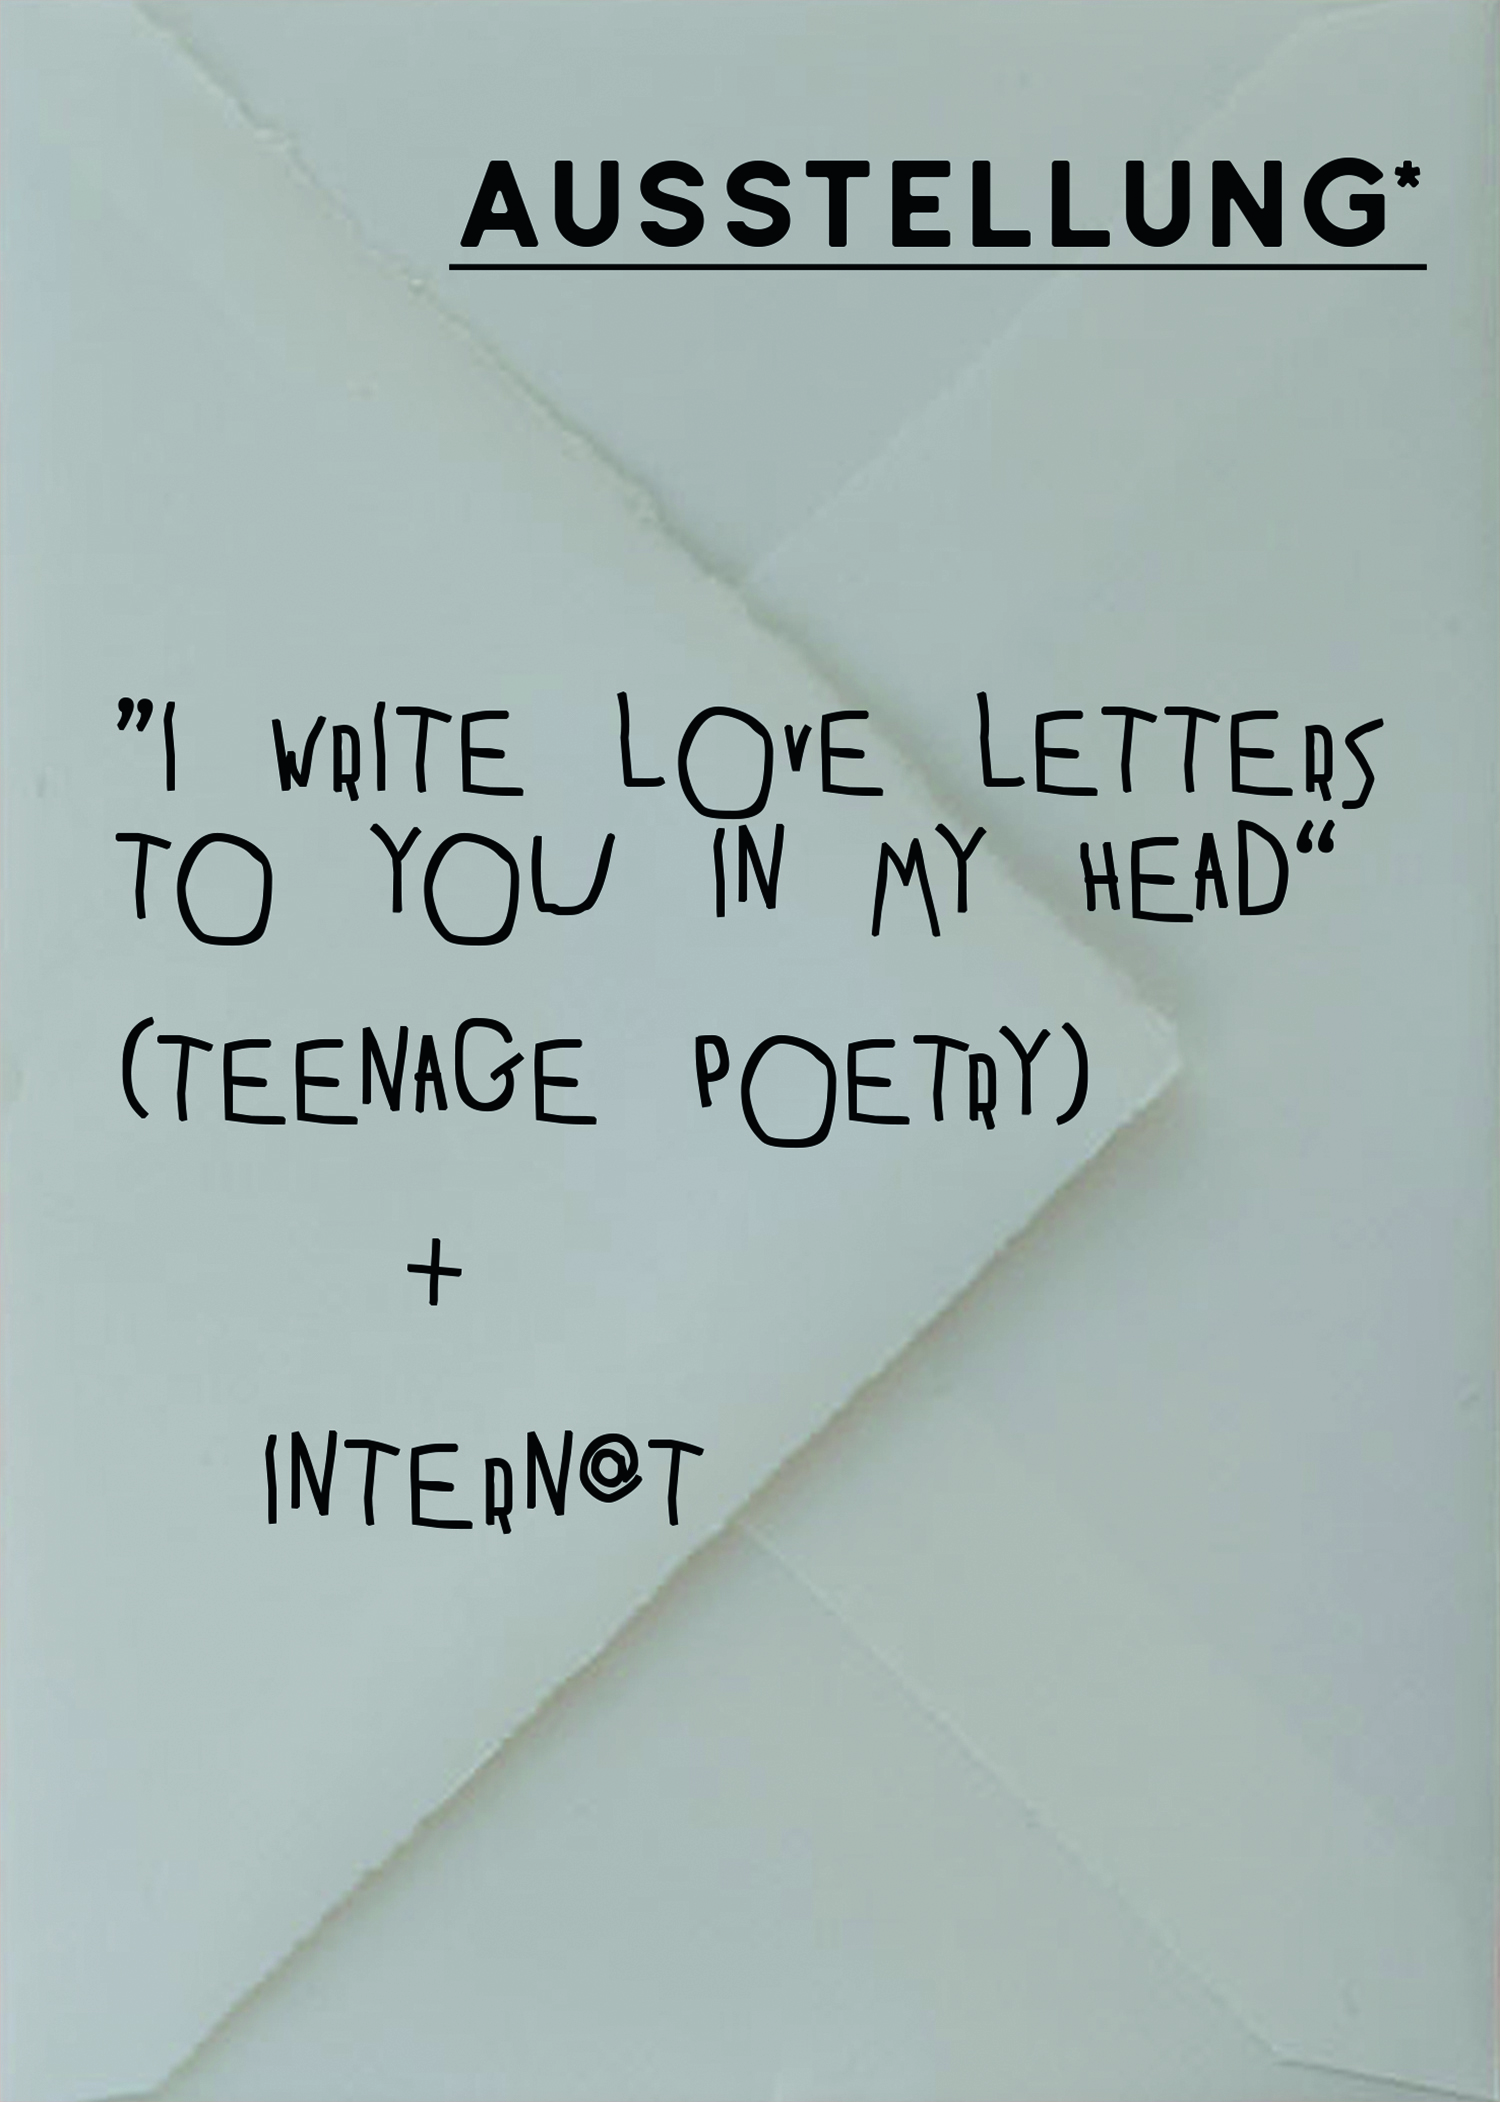 „i WRITE LOVE LETTERS TO YOU IN MY HEAD“